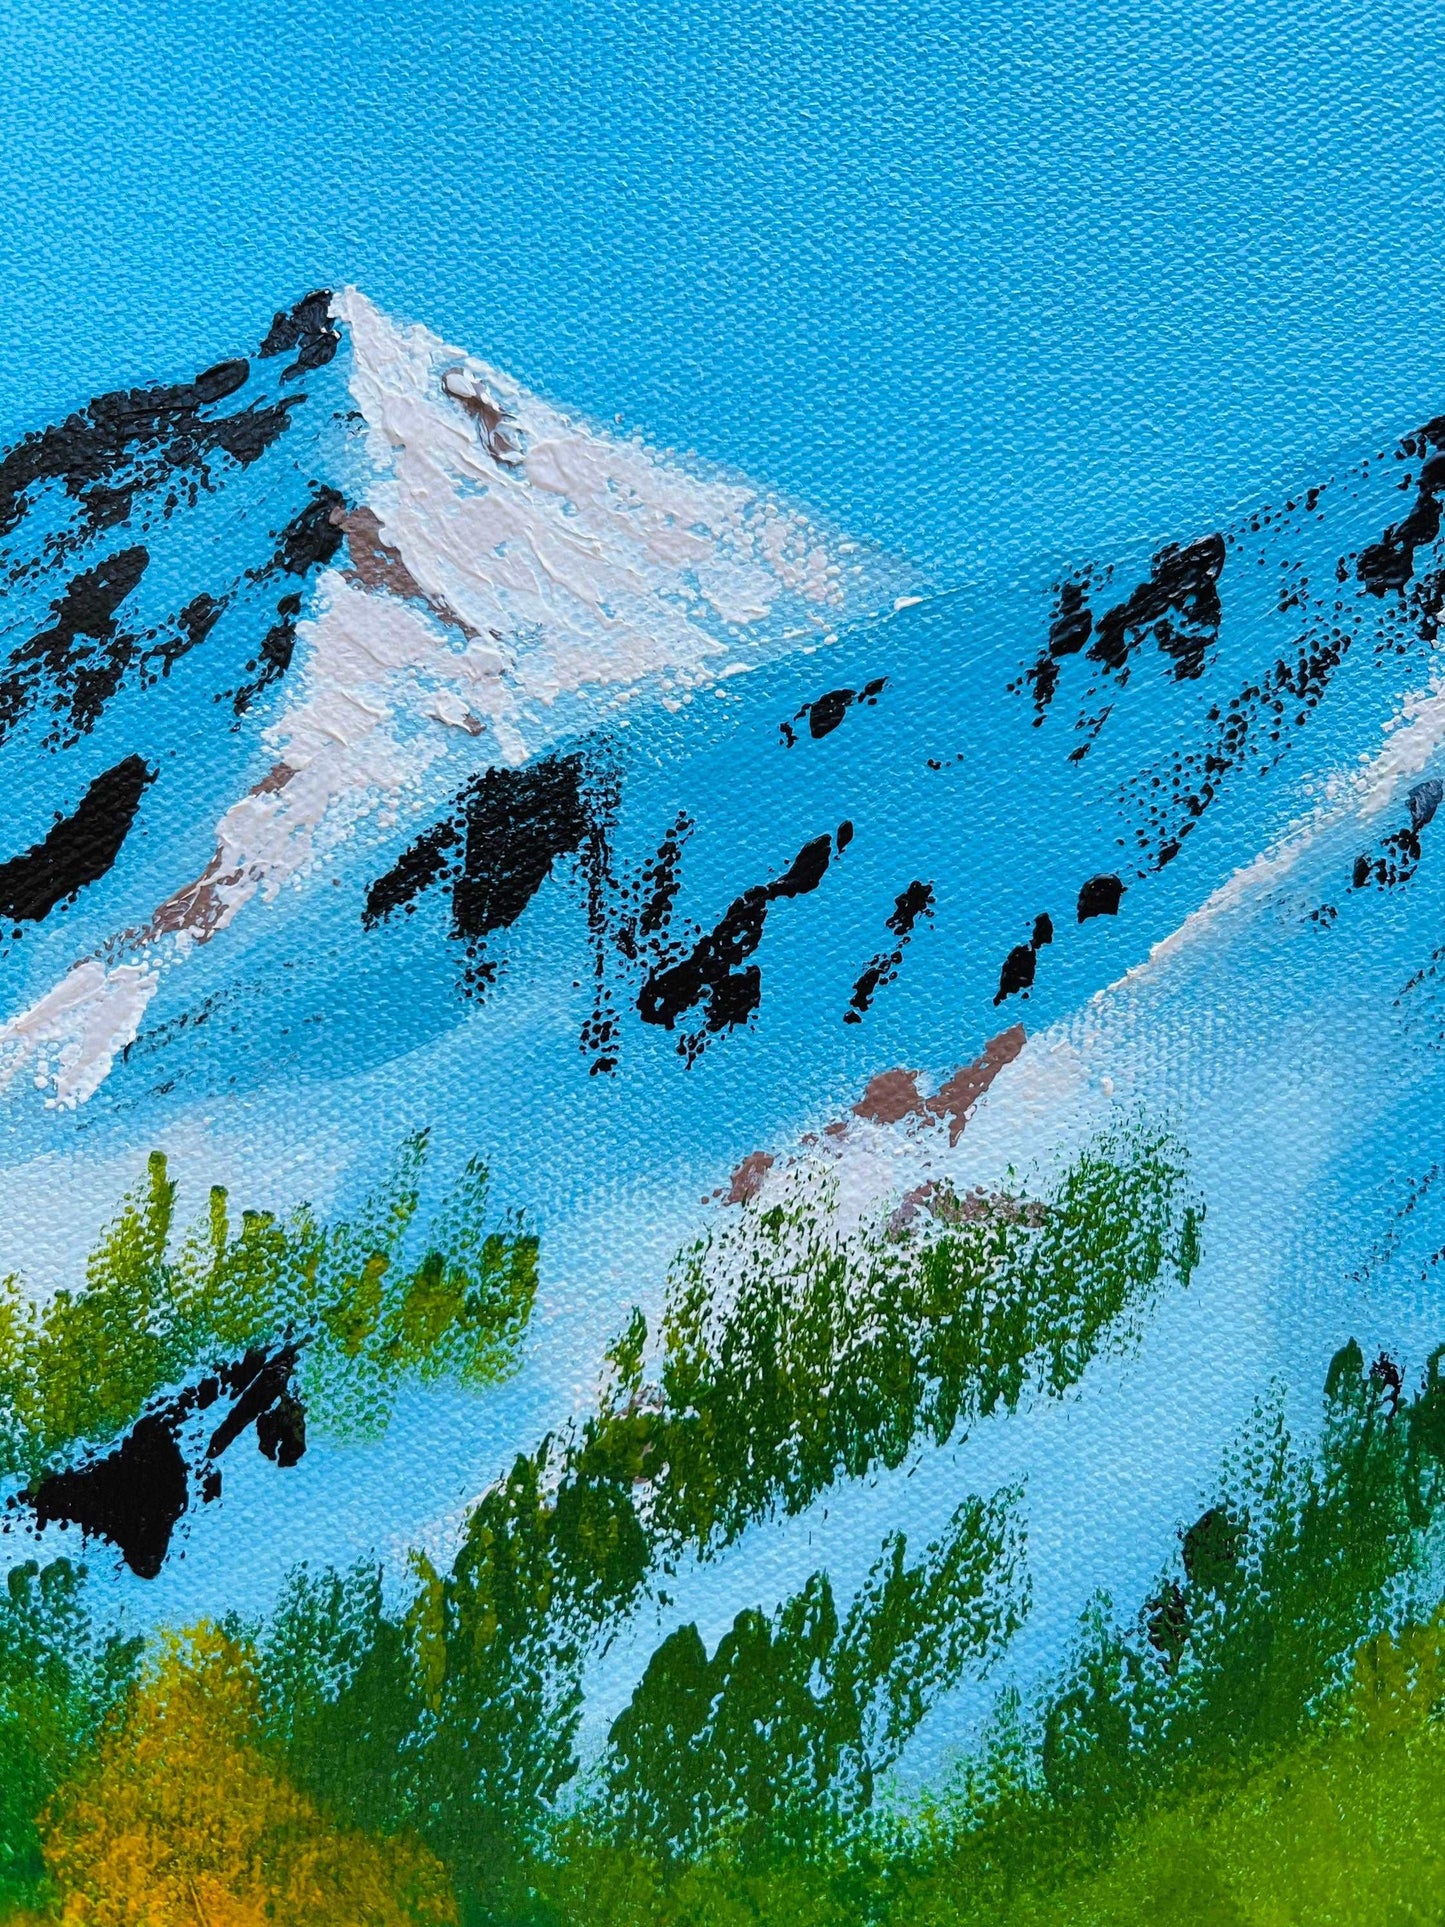 Snowy mountain painting commission